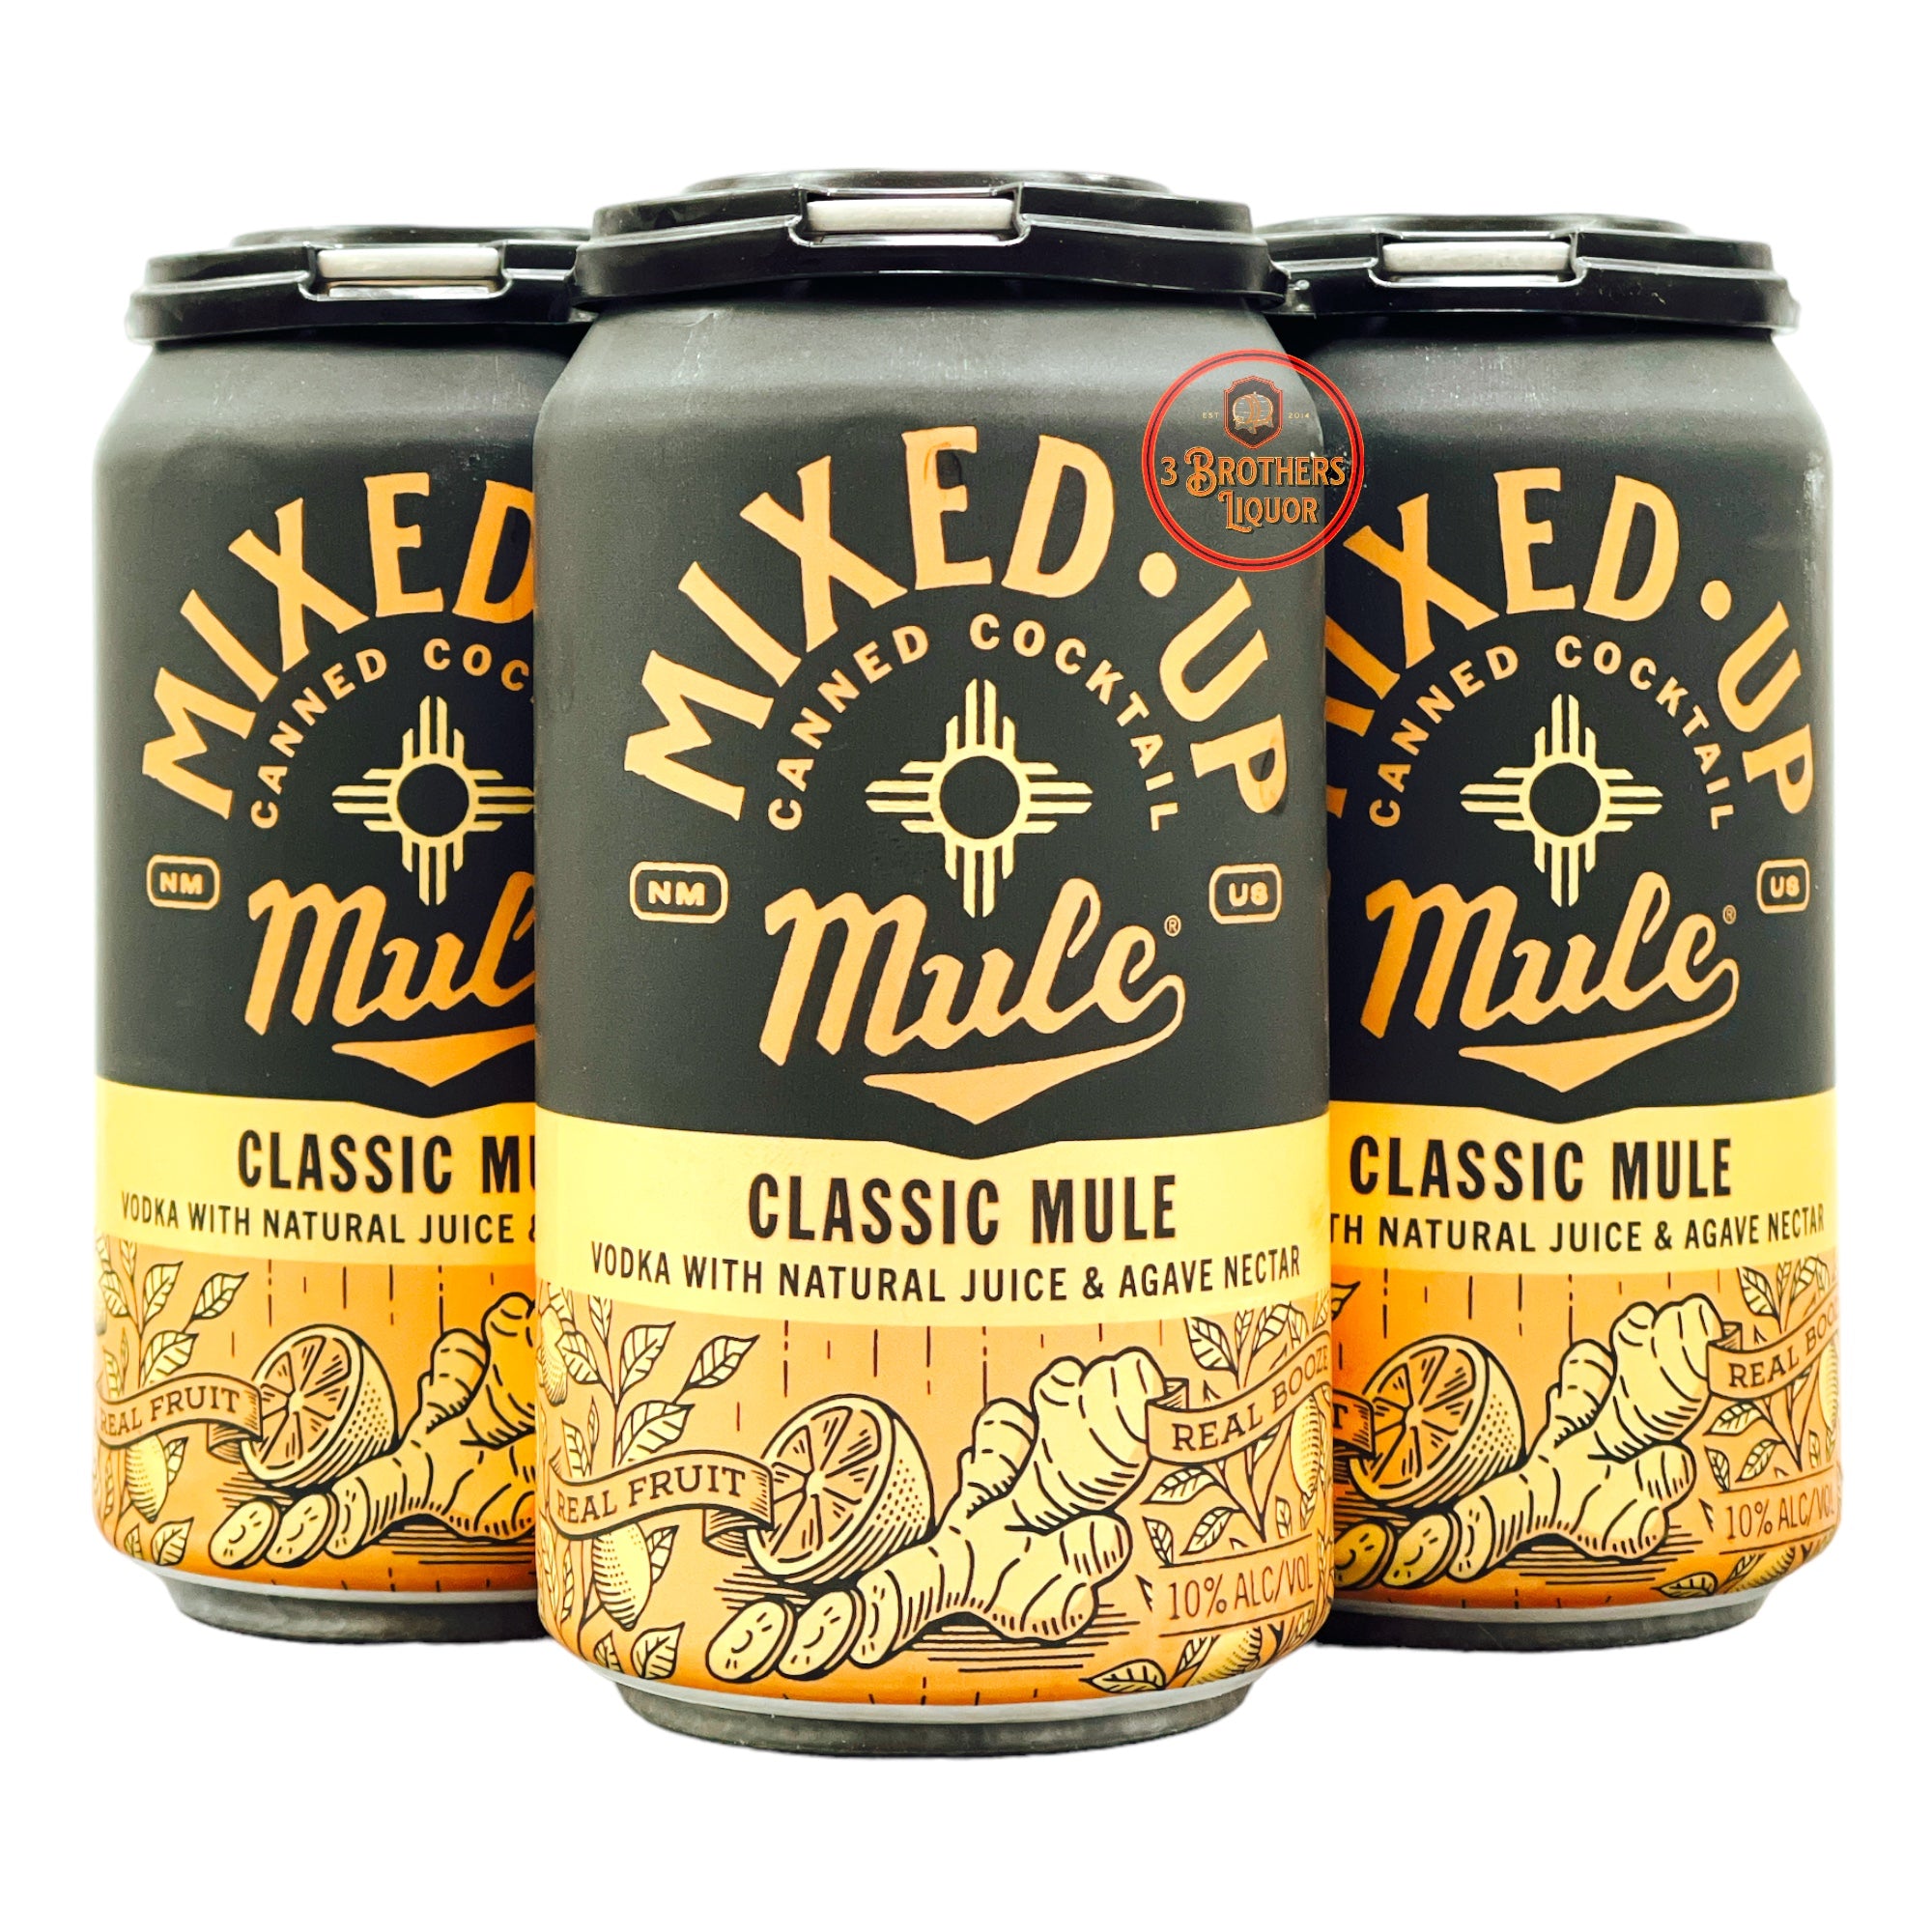 Mixed Up Mule Classic Mule 4Pk Canned Cocktails